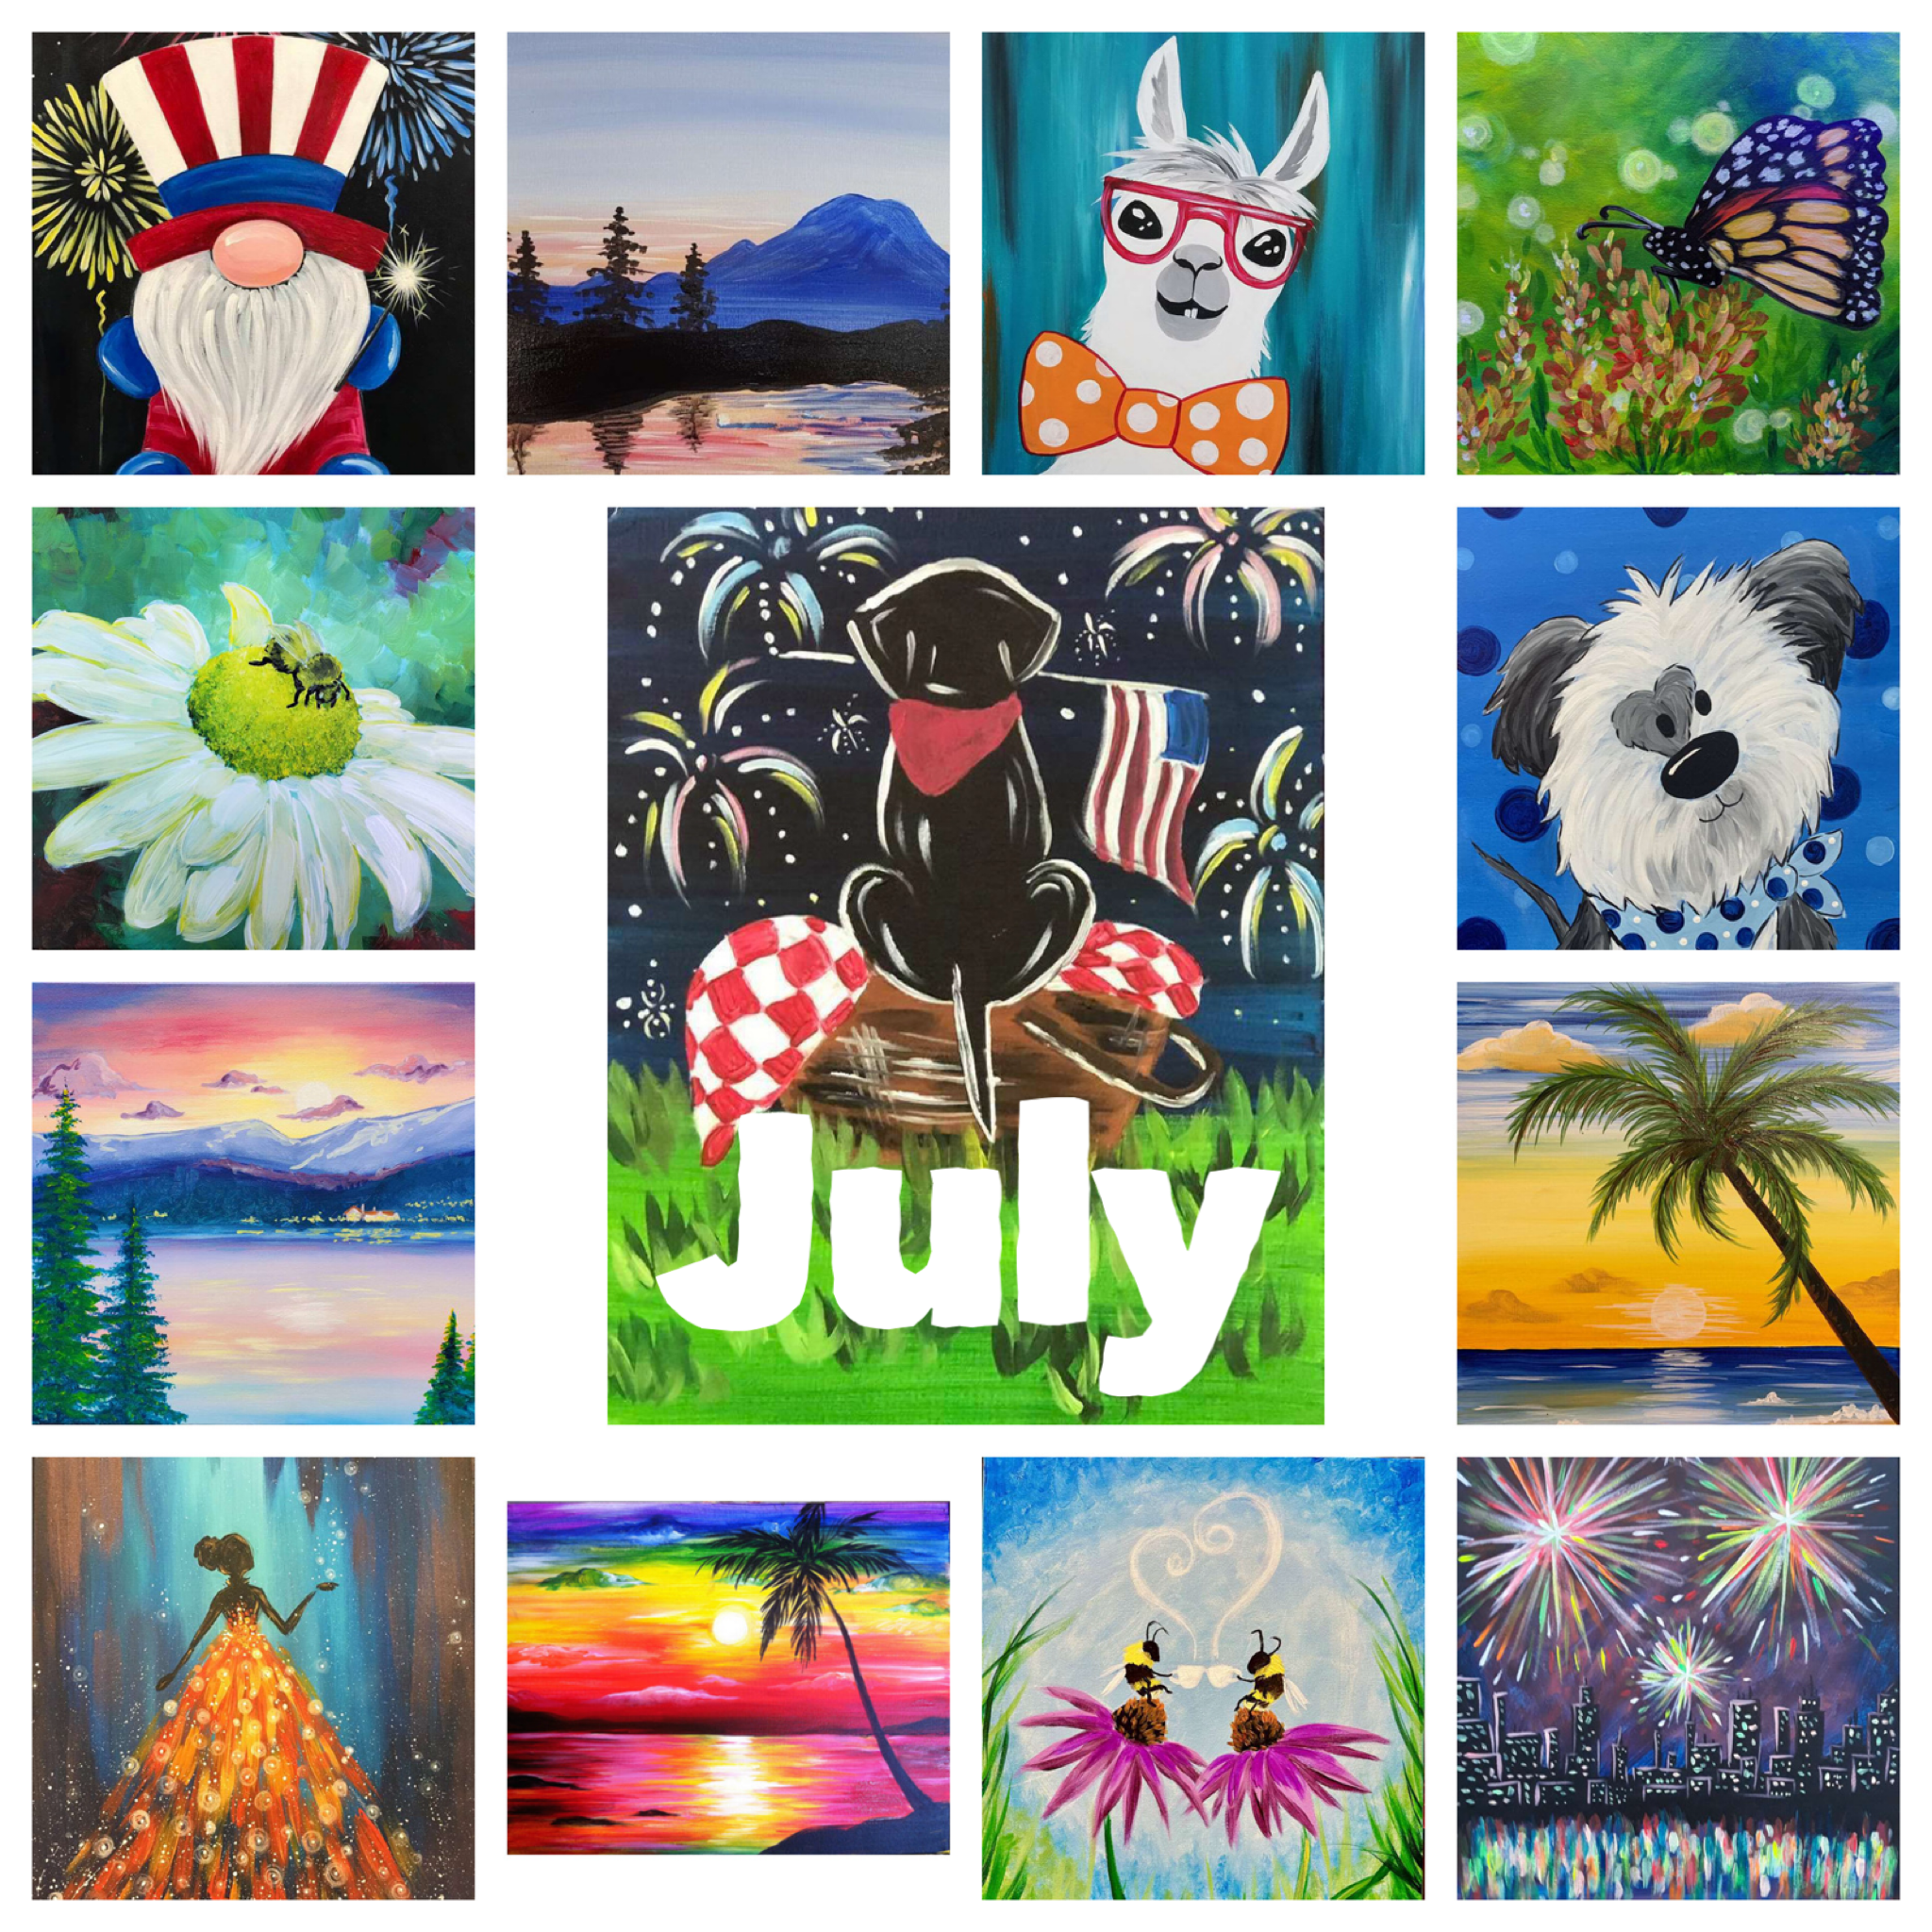 Discover the Joy of July Painting Classes at Pinot's Palette in Cincinnati!